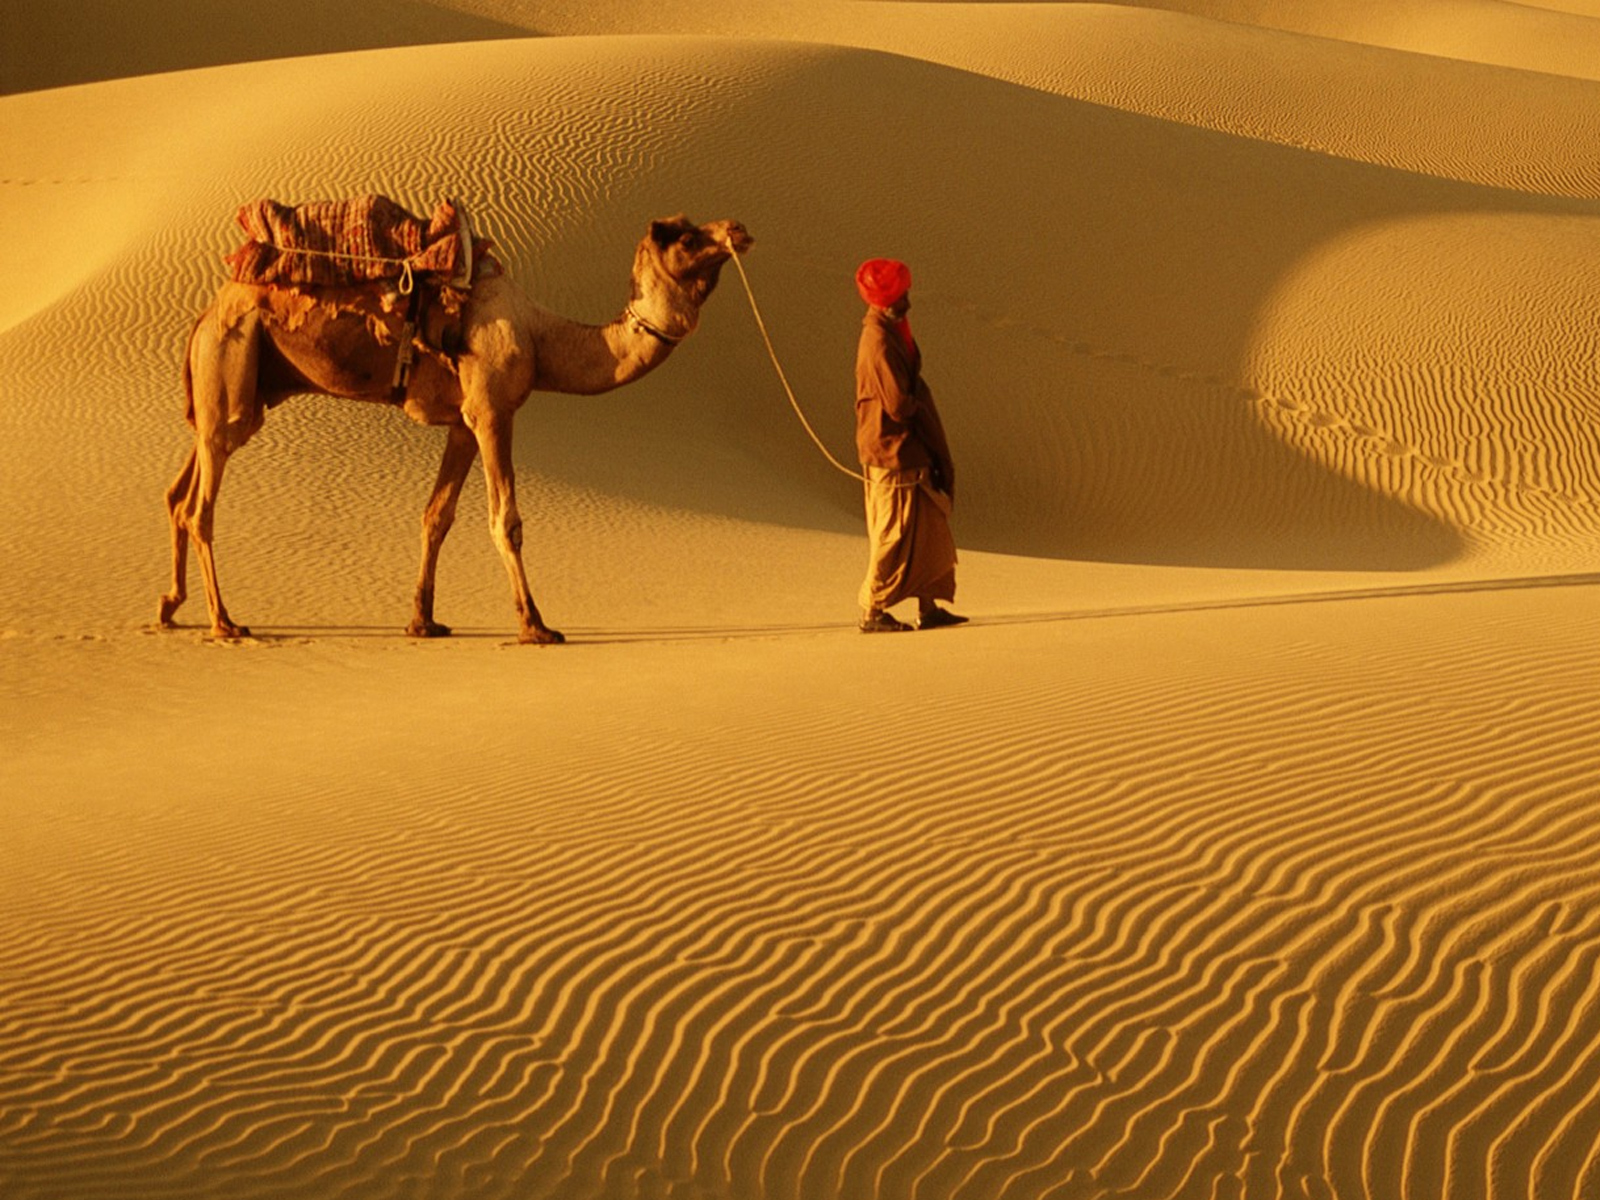 Experience Rajasthan: 8 Events You Cannot Afford To Miss in Rajasthan